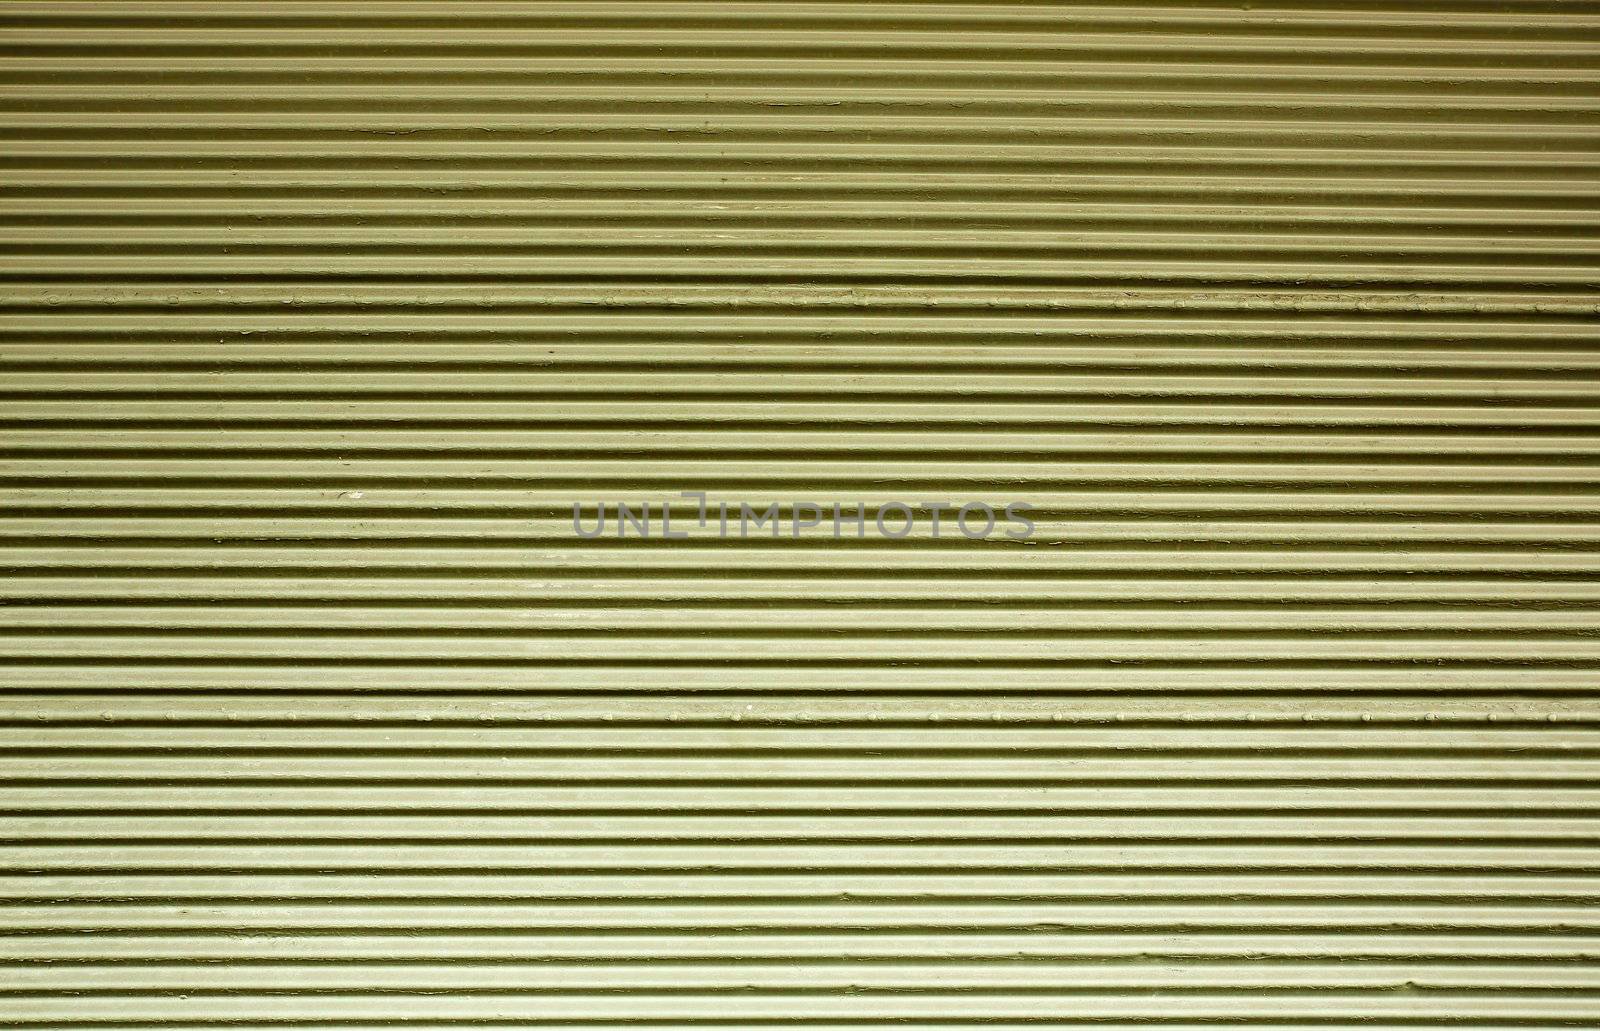 Horizontal corrugated steel wall with a green tint